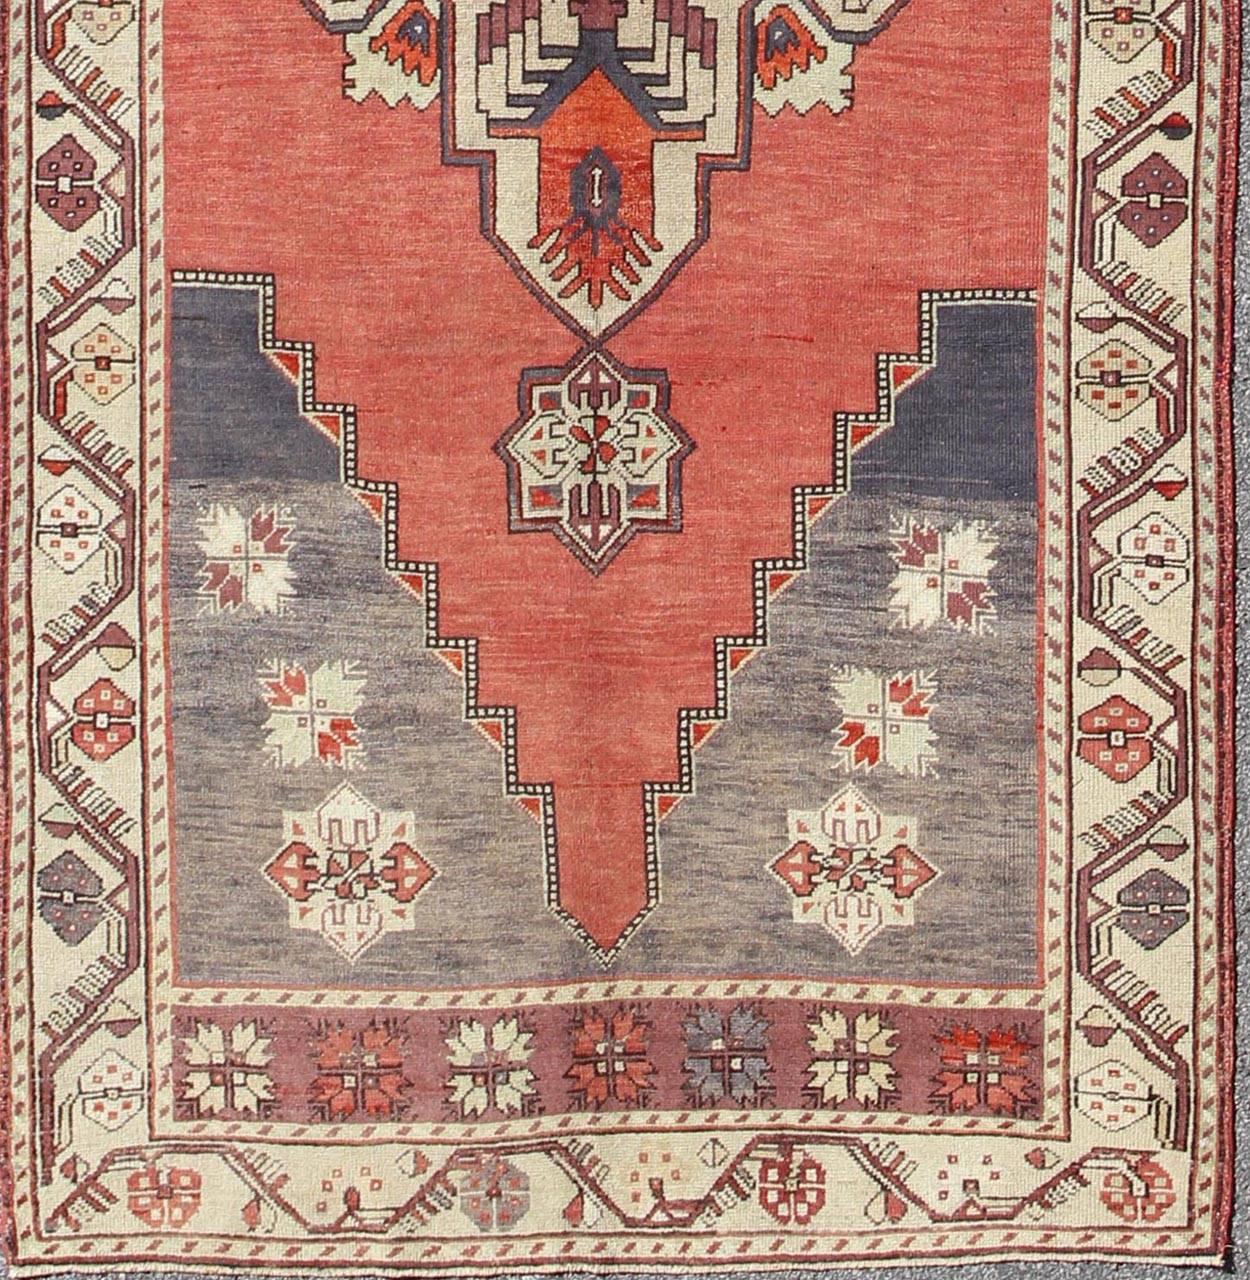  Vintage Turkish Oushak Gallery runner with geometric dual medallions in Light Green, soft coral red, gray, ivory, Keivan Woven Arts/ rug/ TU-TRS-34562, country of origin / type: Turkey / Oushak, circa 1940

Measures: 5'3 x 14'10. 

This Turkish